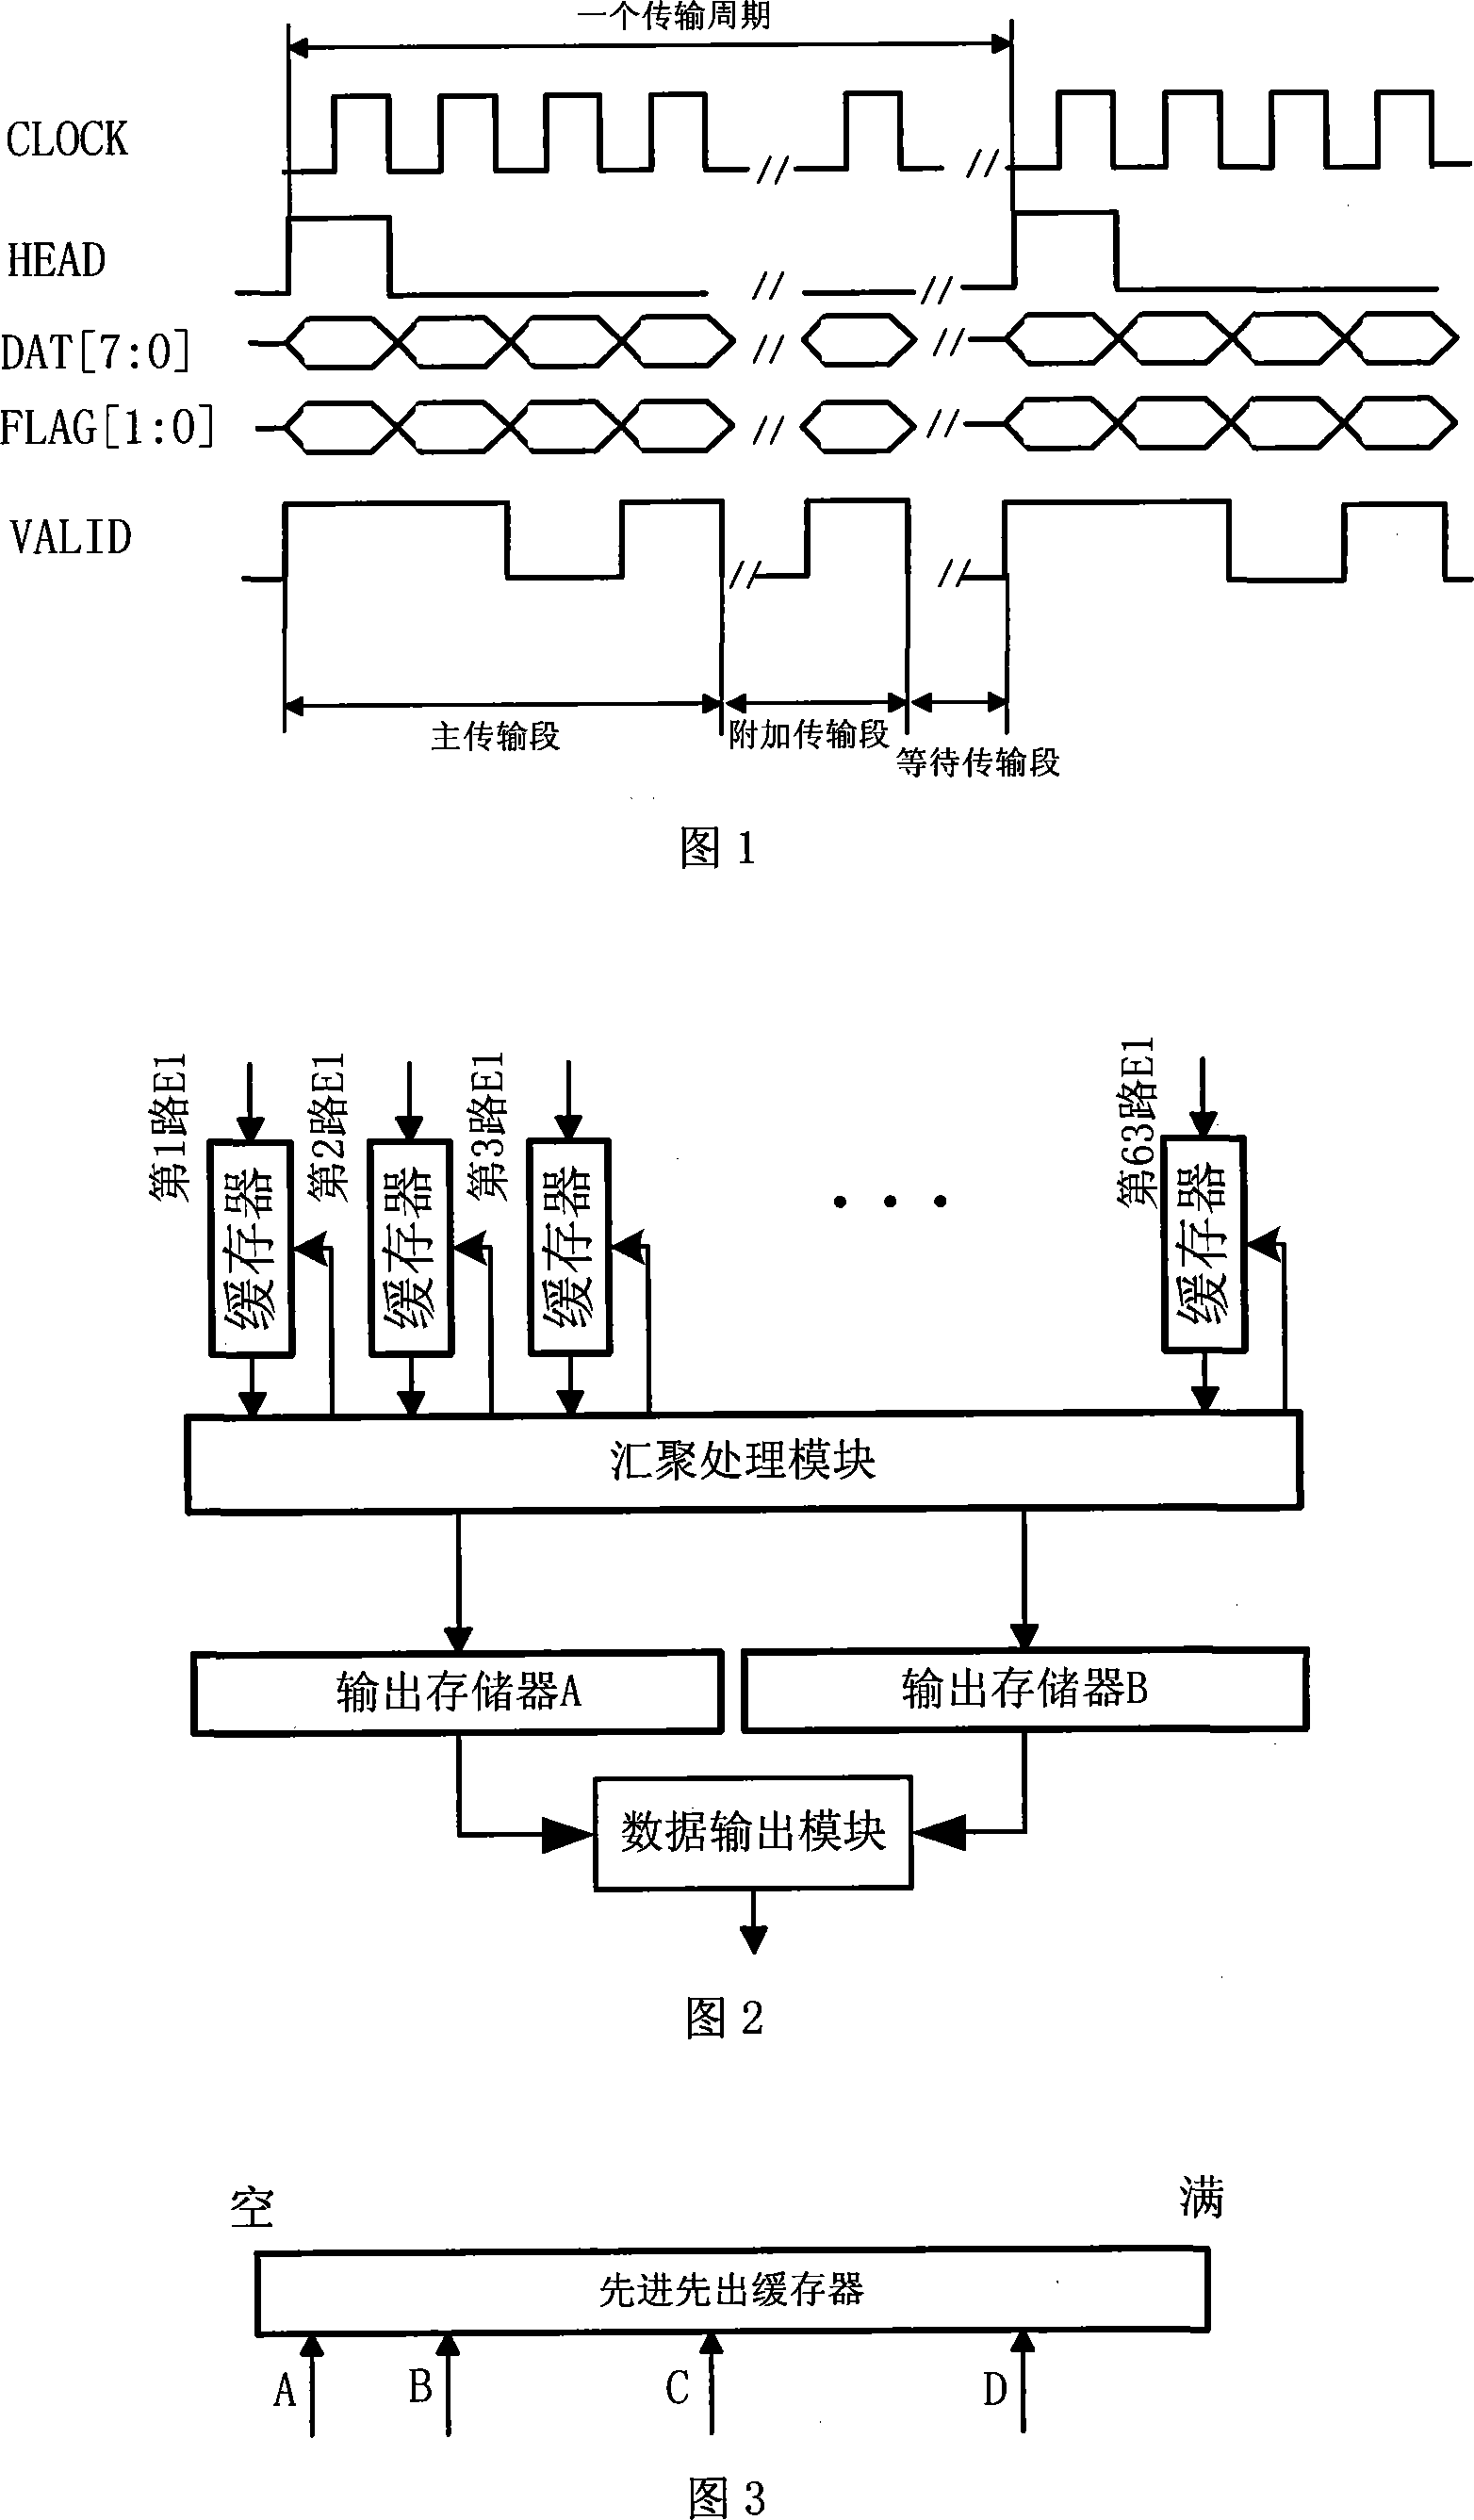 Convergence transmission method of multi-channel E1 data with frequency deviation in SDH signals